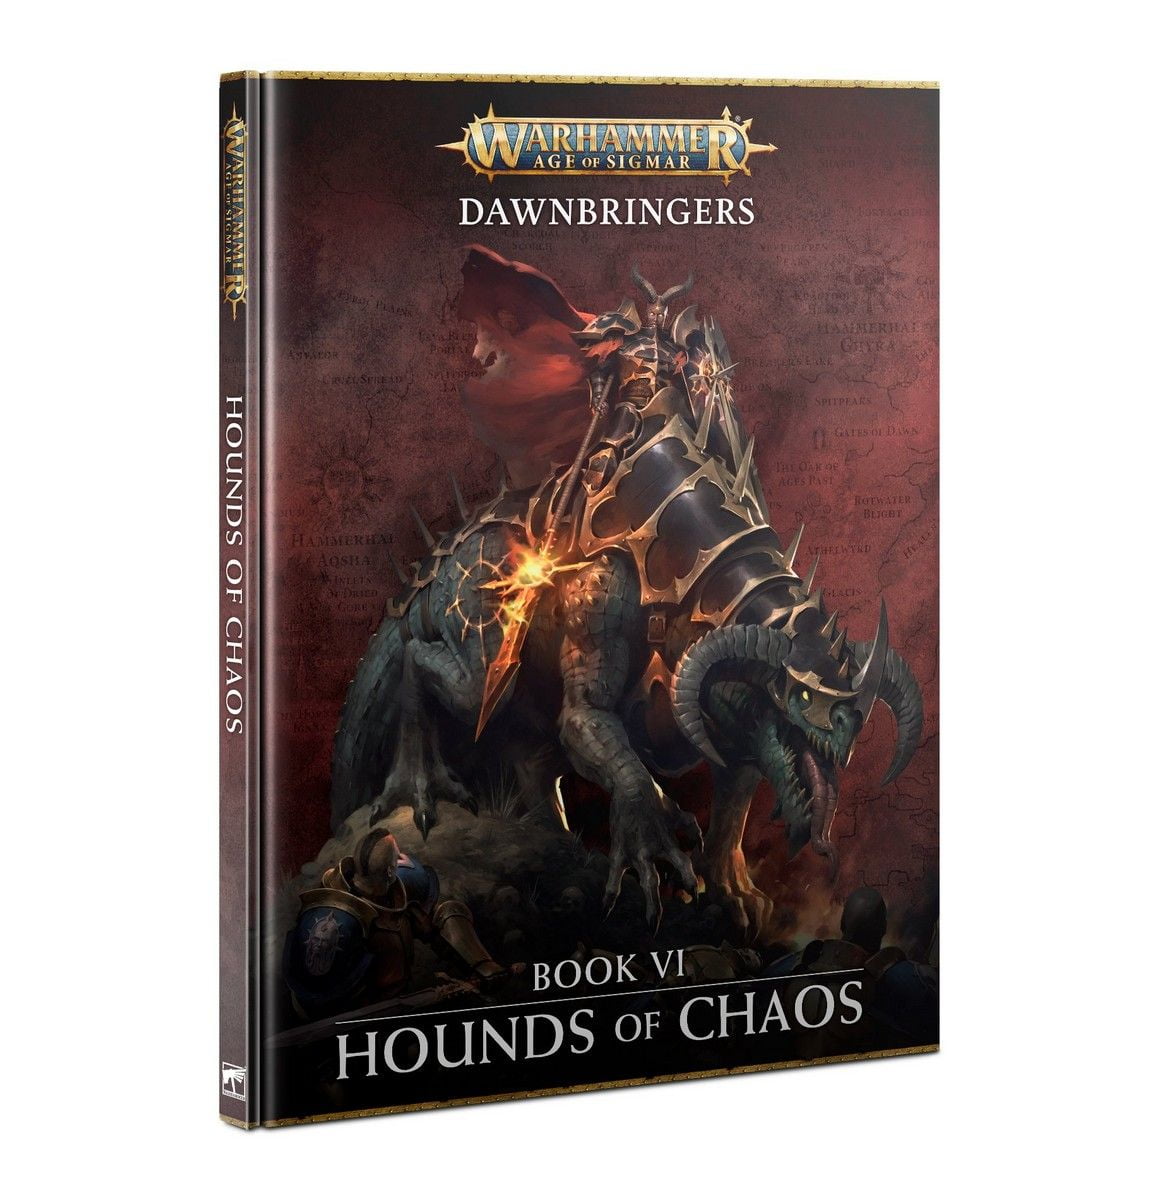 Dawnbringers Book 6 - Hounds of Chaos - English